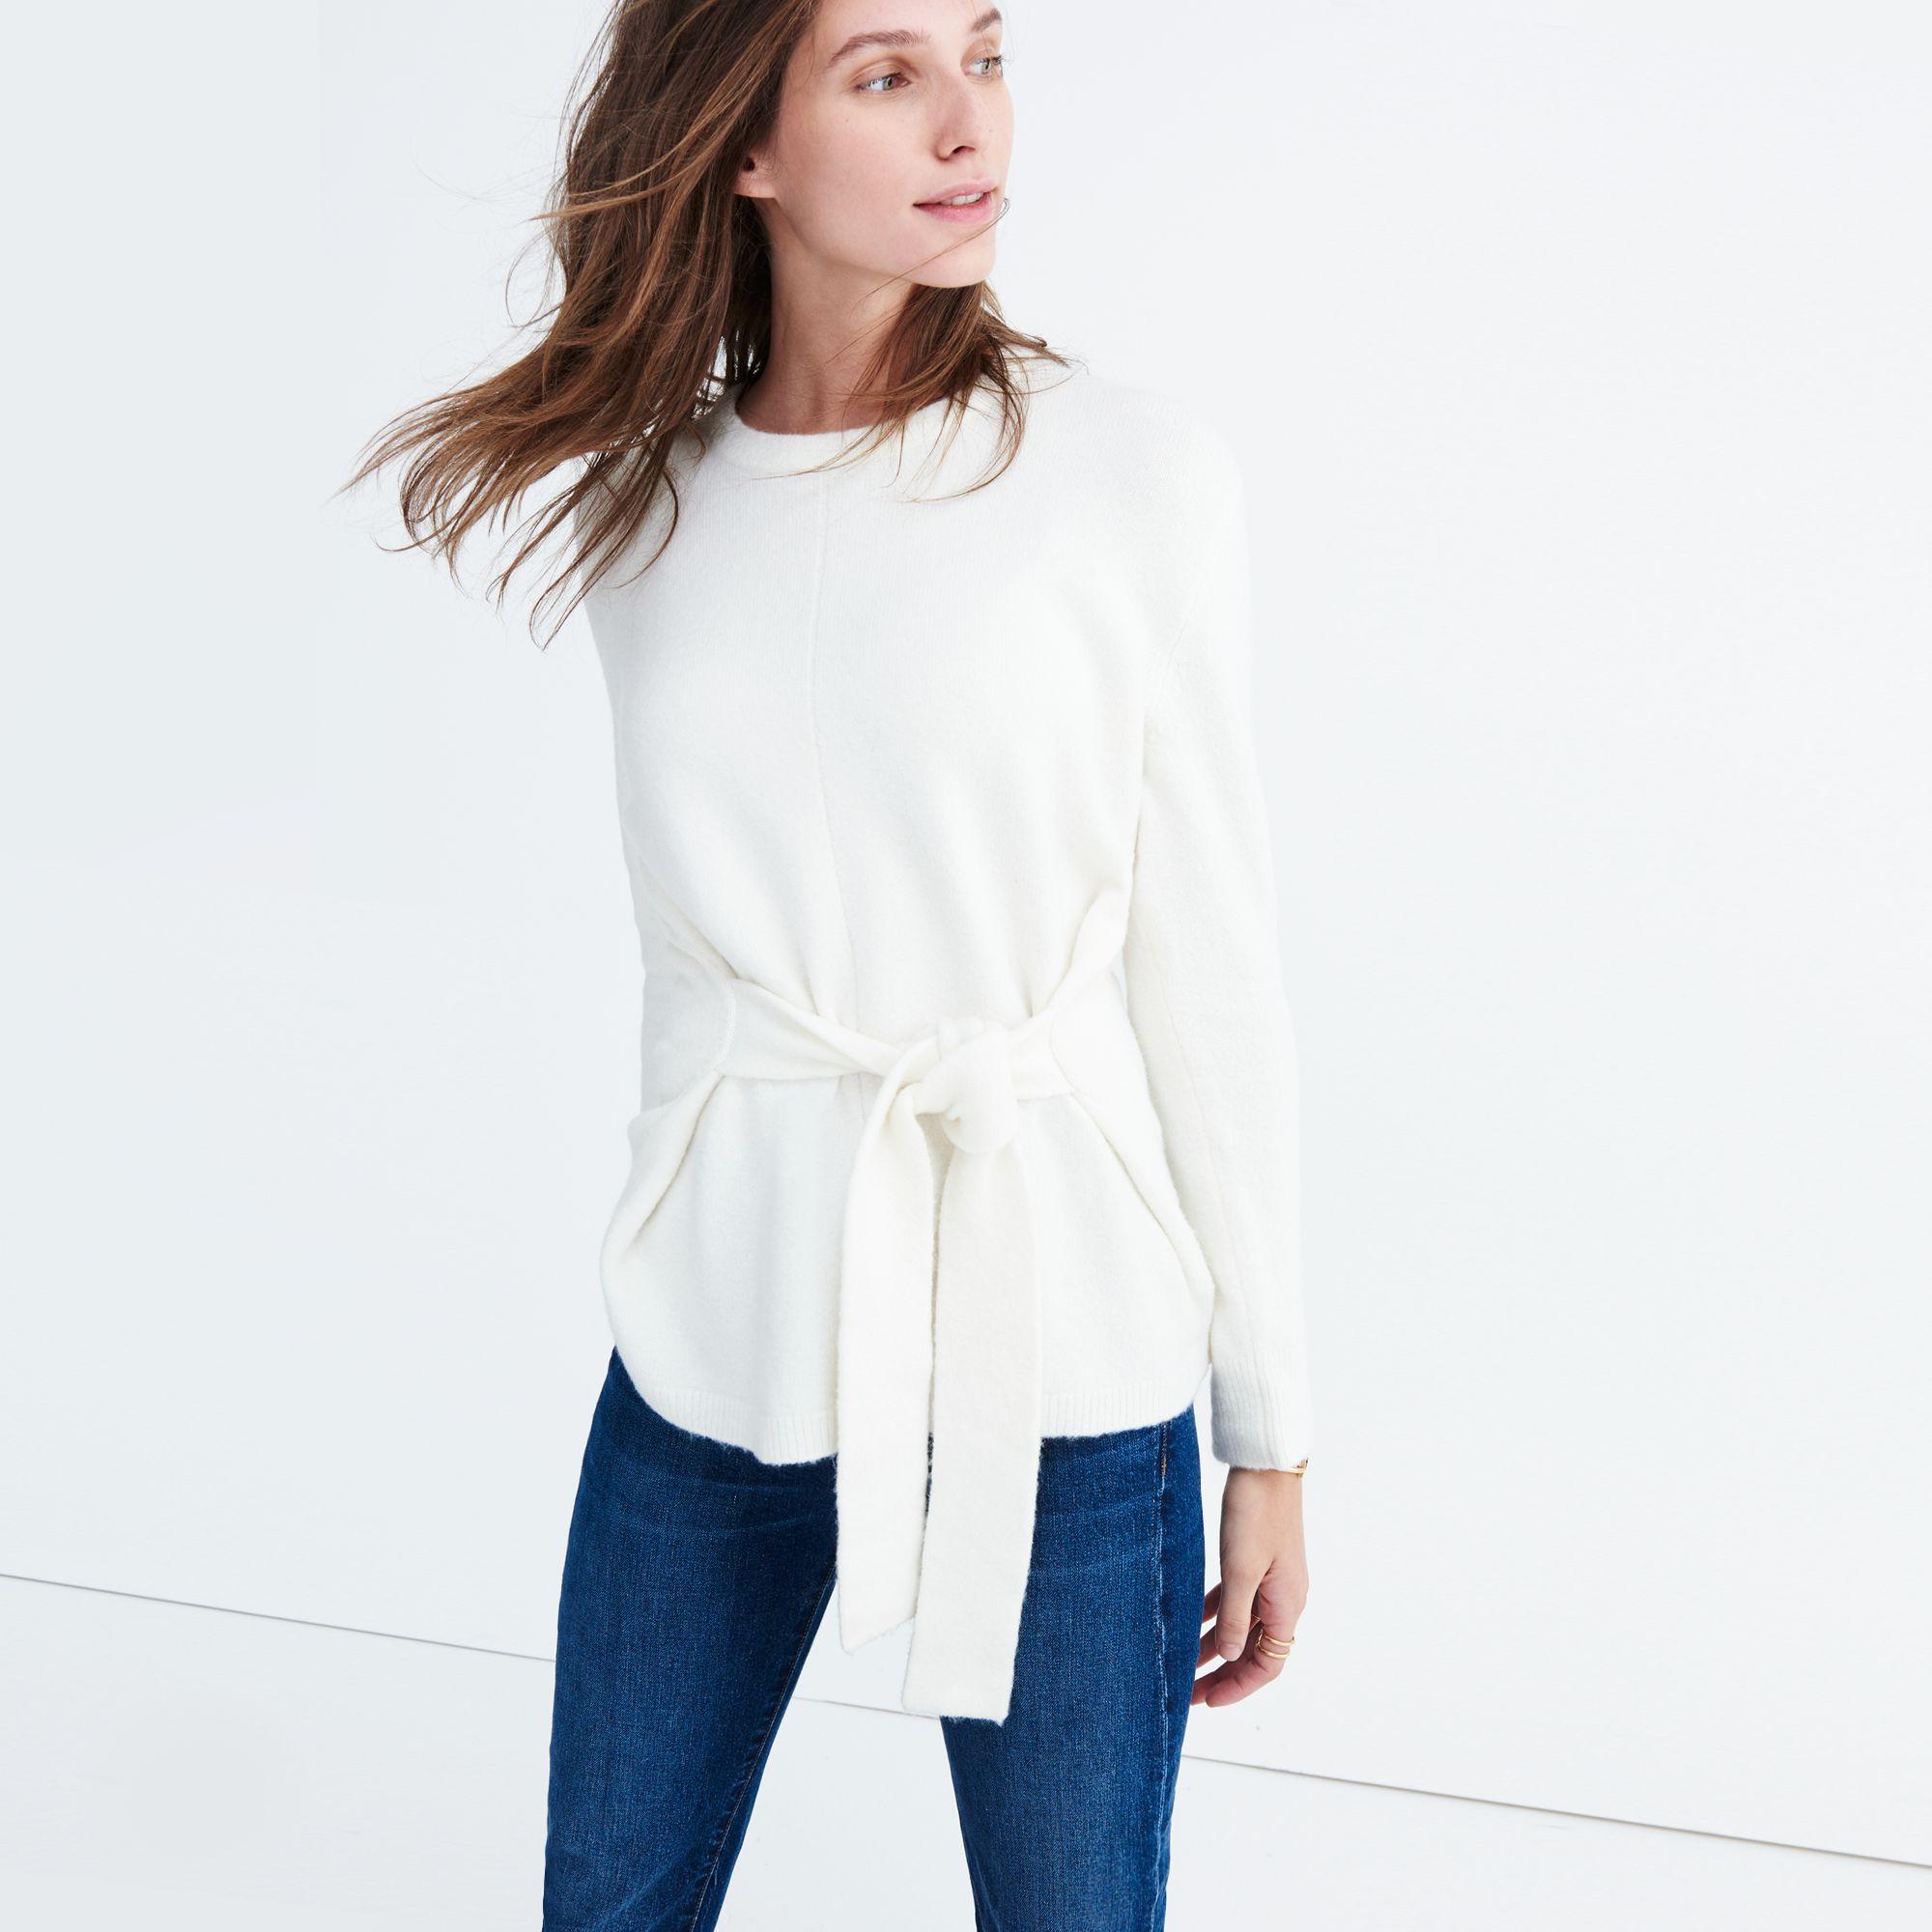 White wrap sweater outfits for women natural fibers